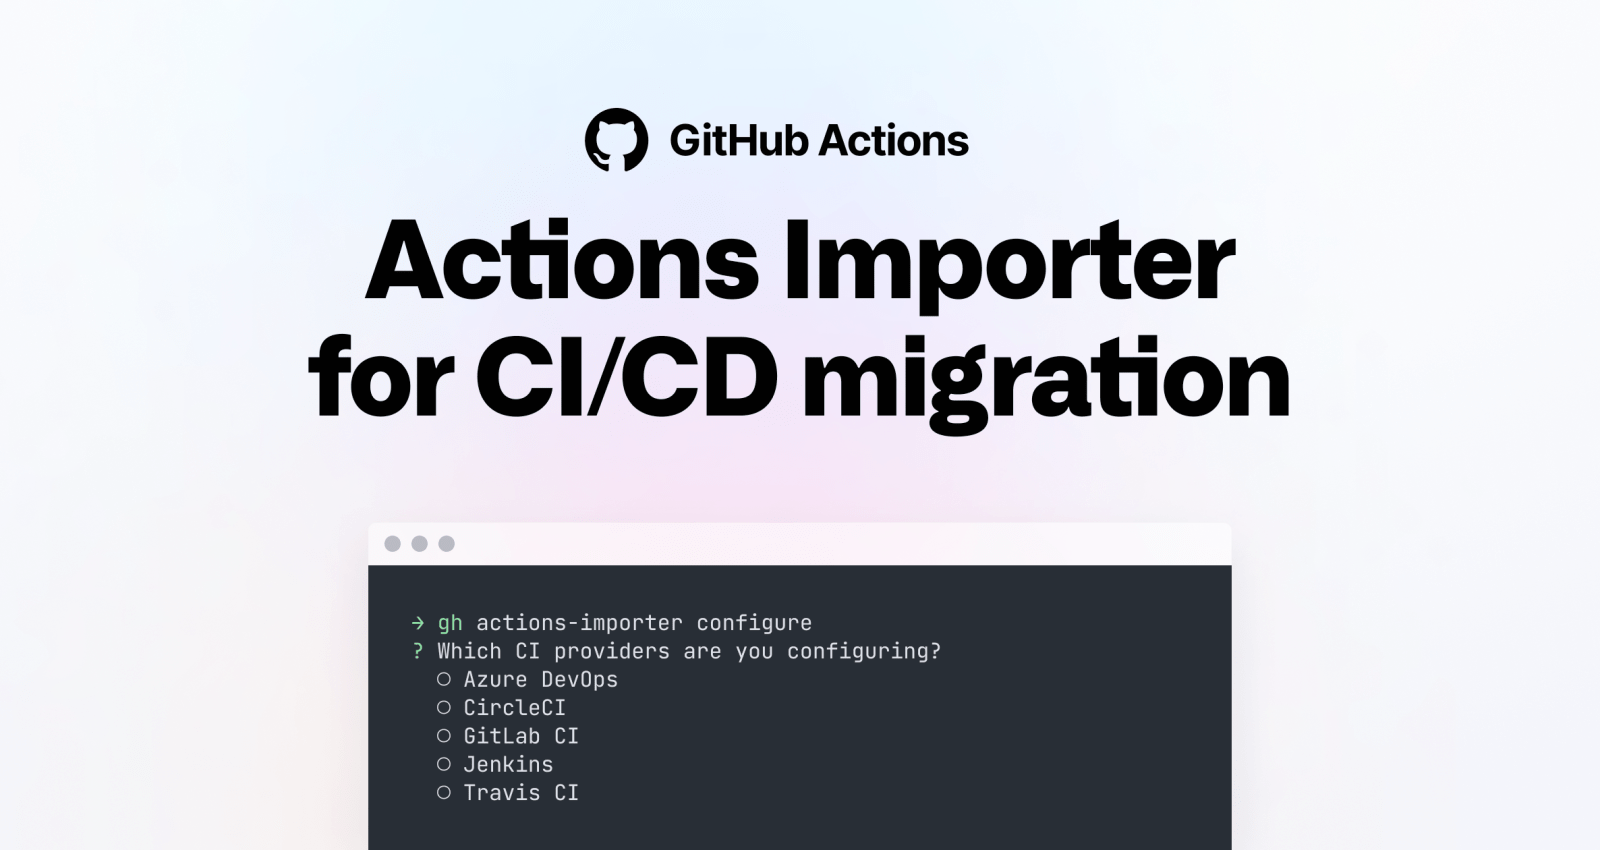 GitHub Actions Importer is now generally available